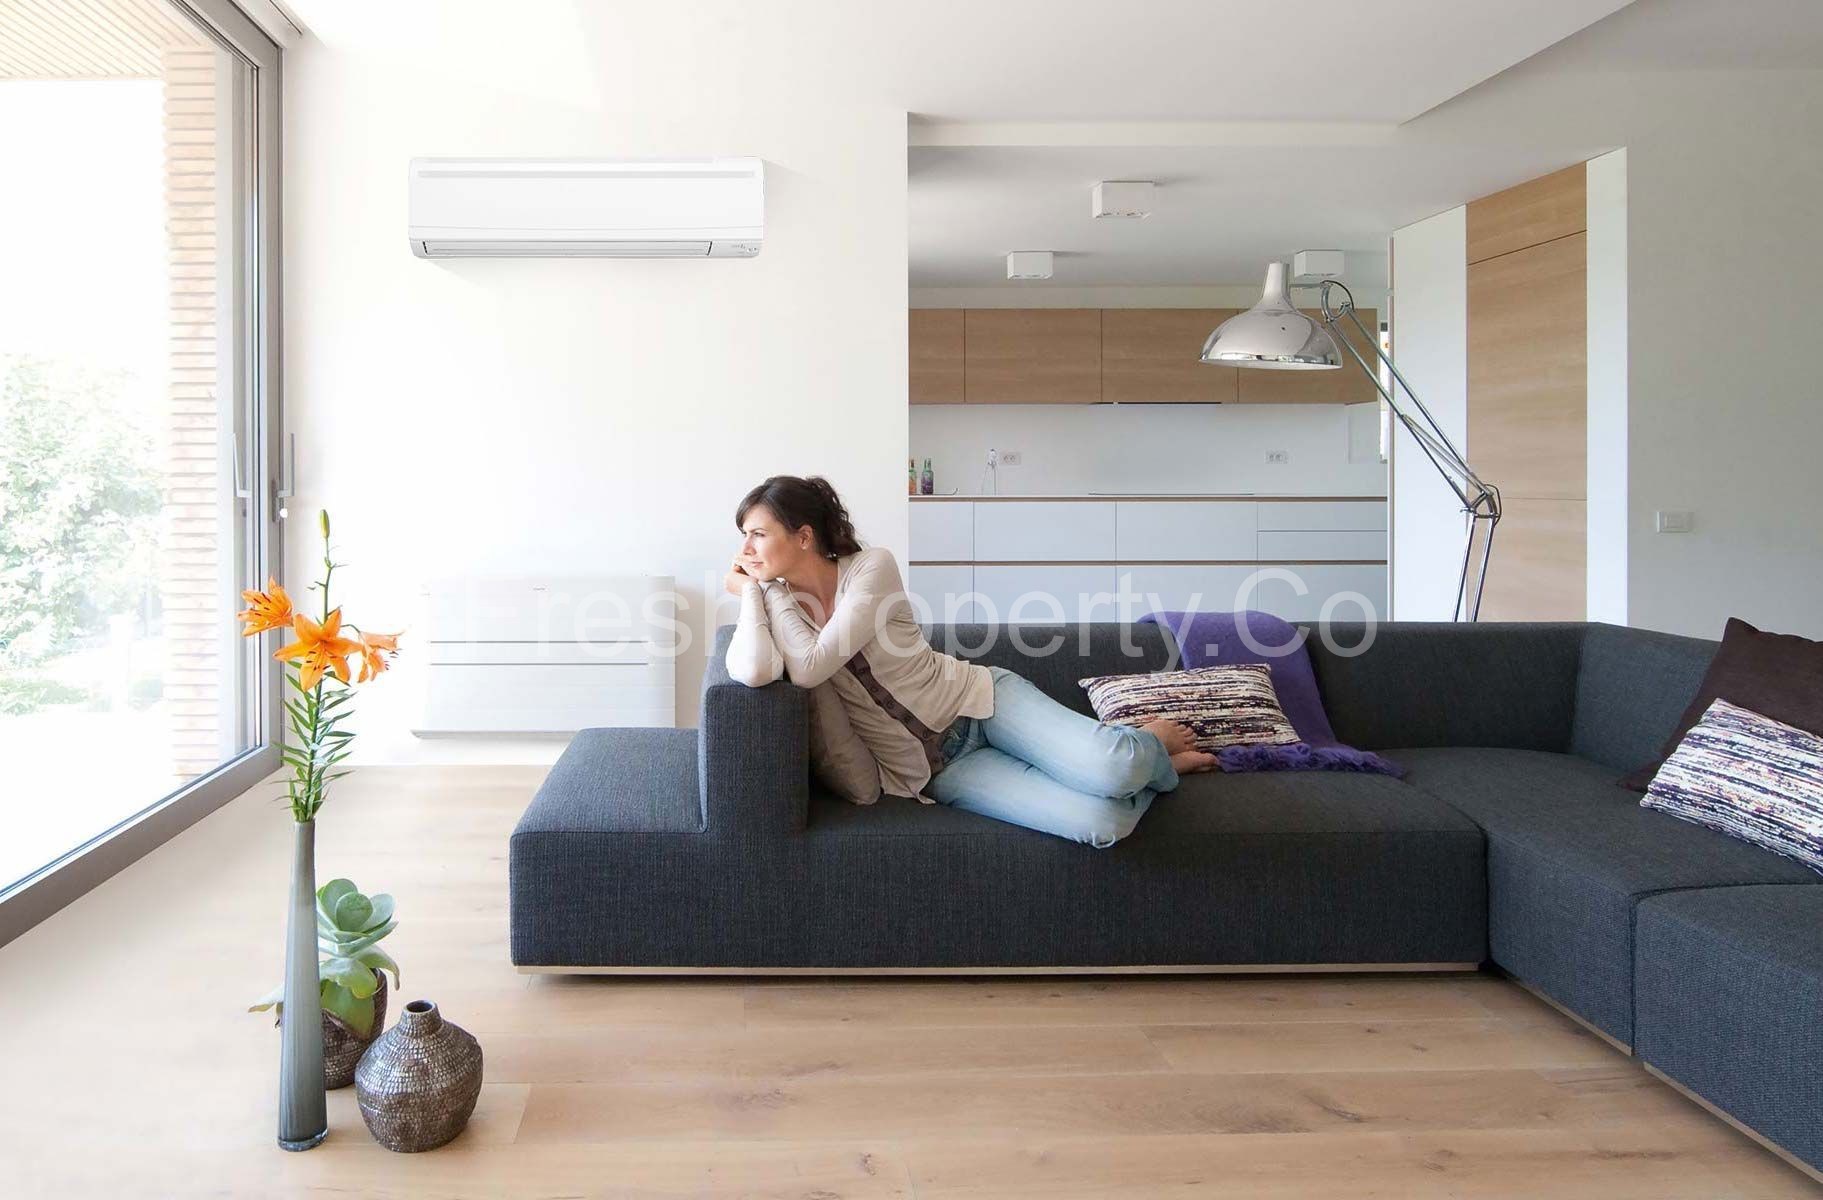 8 Facts About Air-conditioners You Likely Didn’t Know